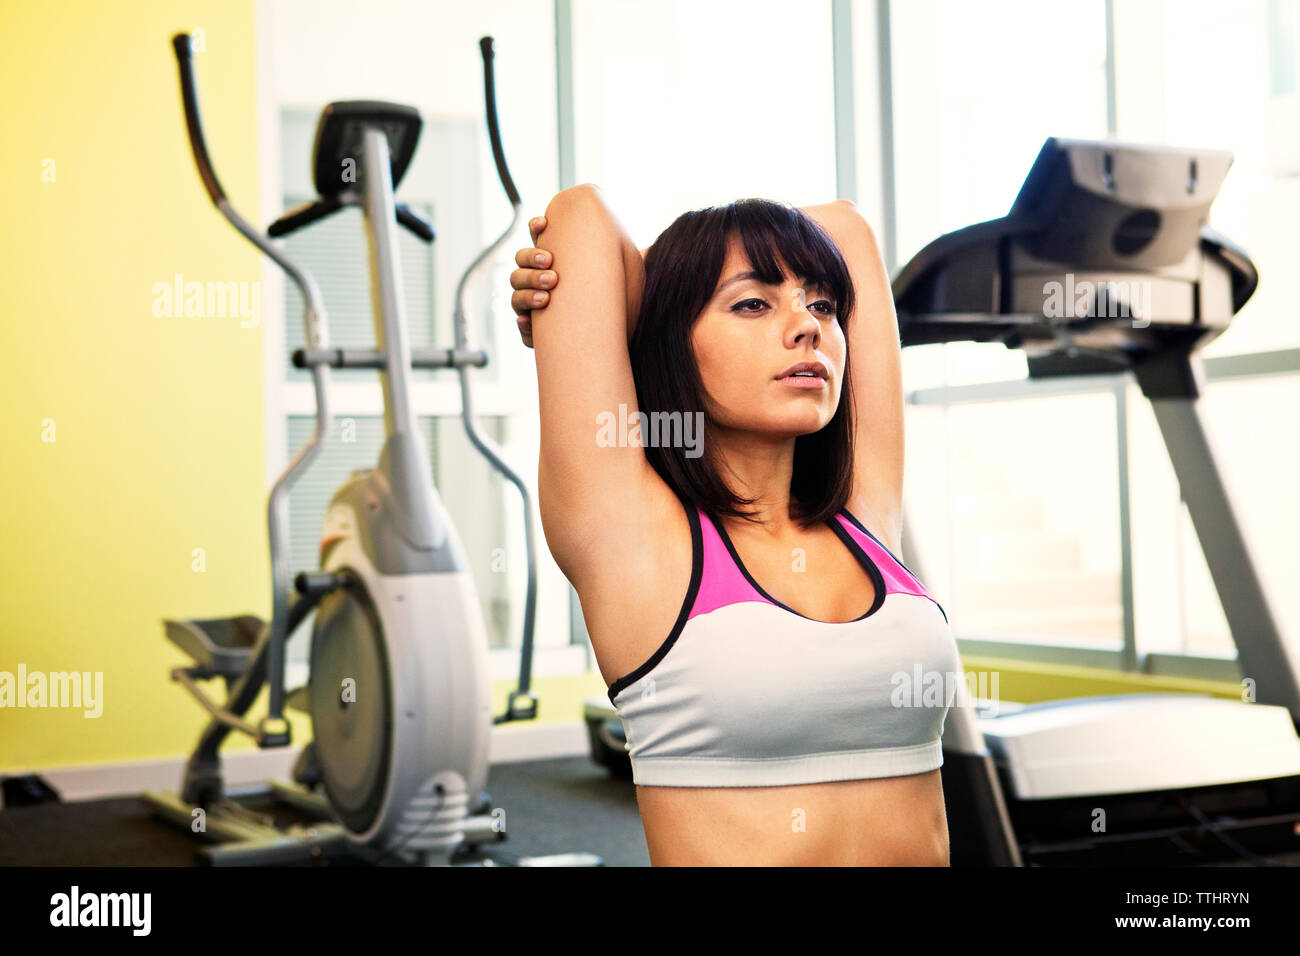 Woman practicing relaxation exercise in gym Stock Photo